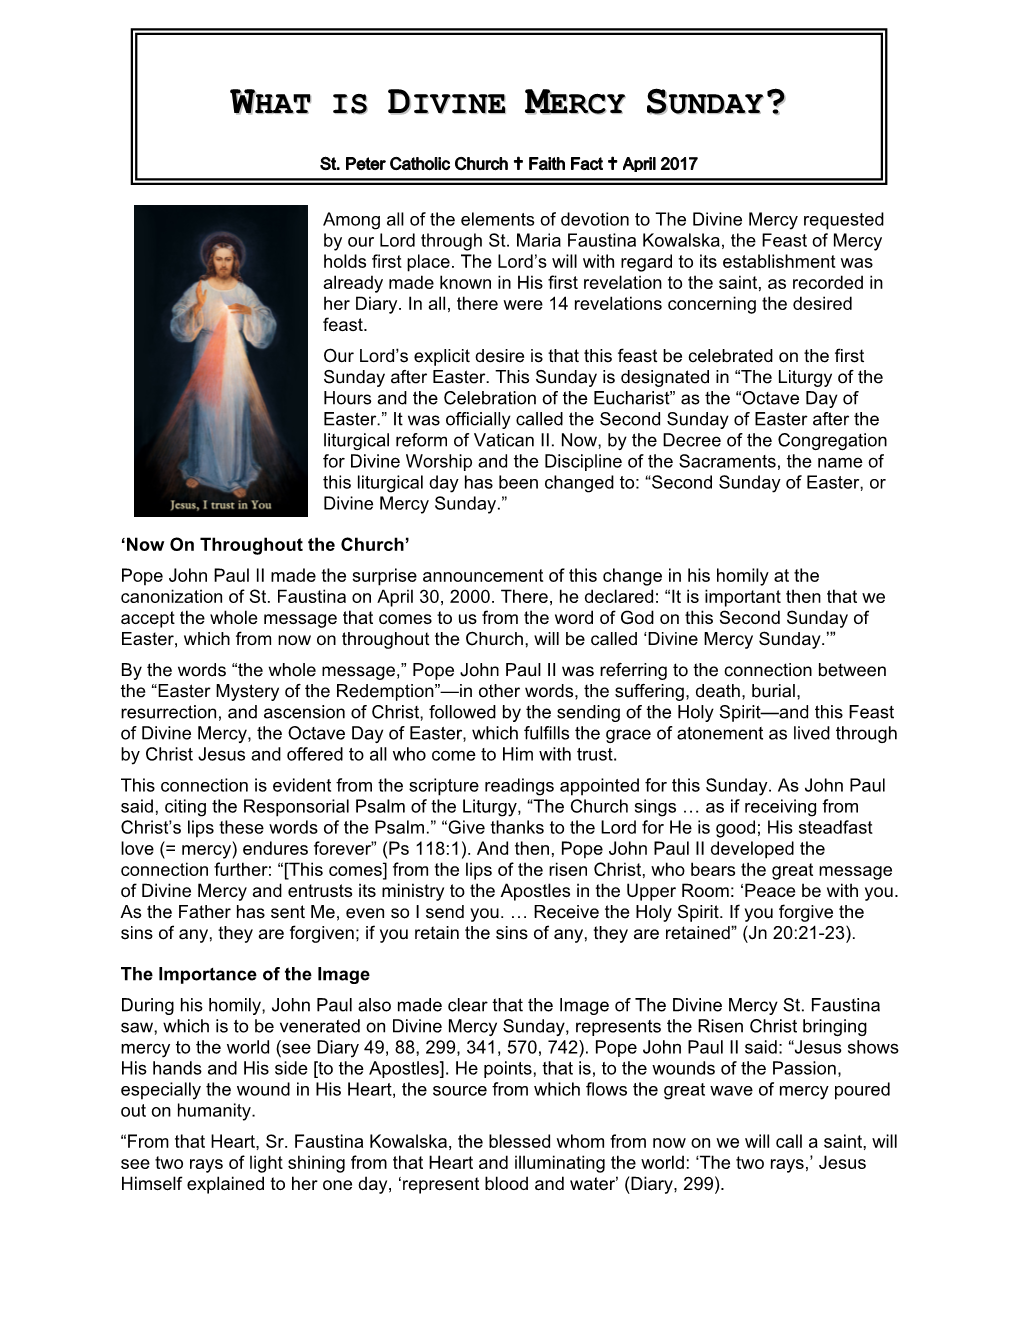 What Is Divine Mercy Sunday?” the Divine Mercy